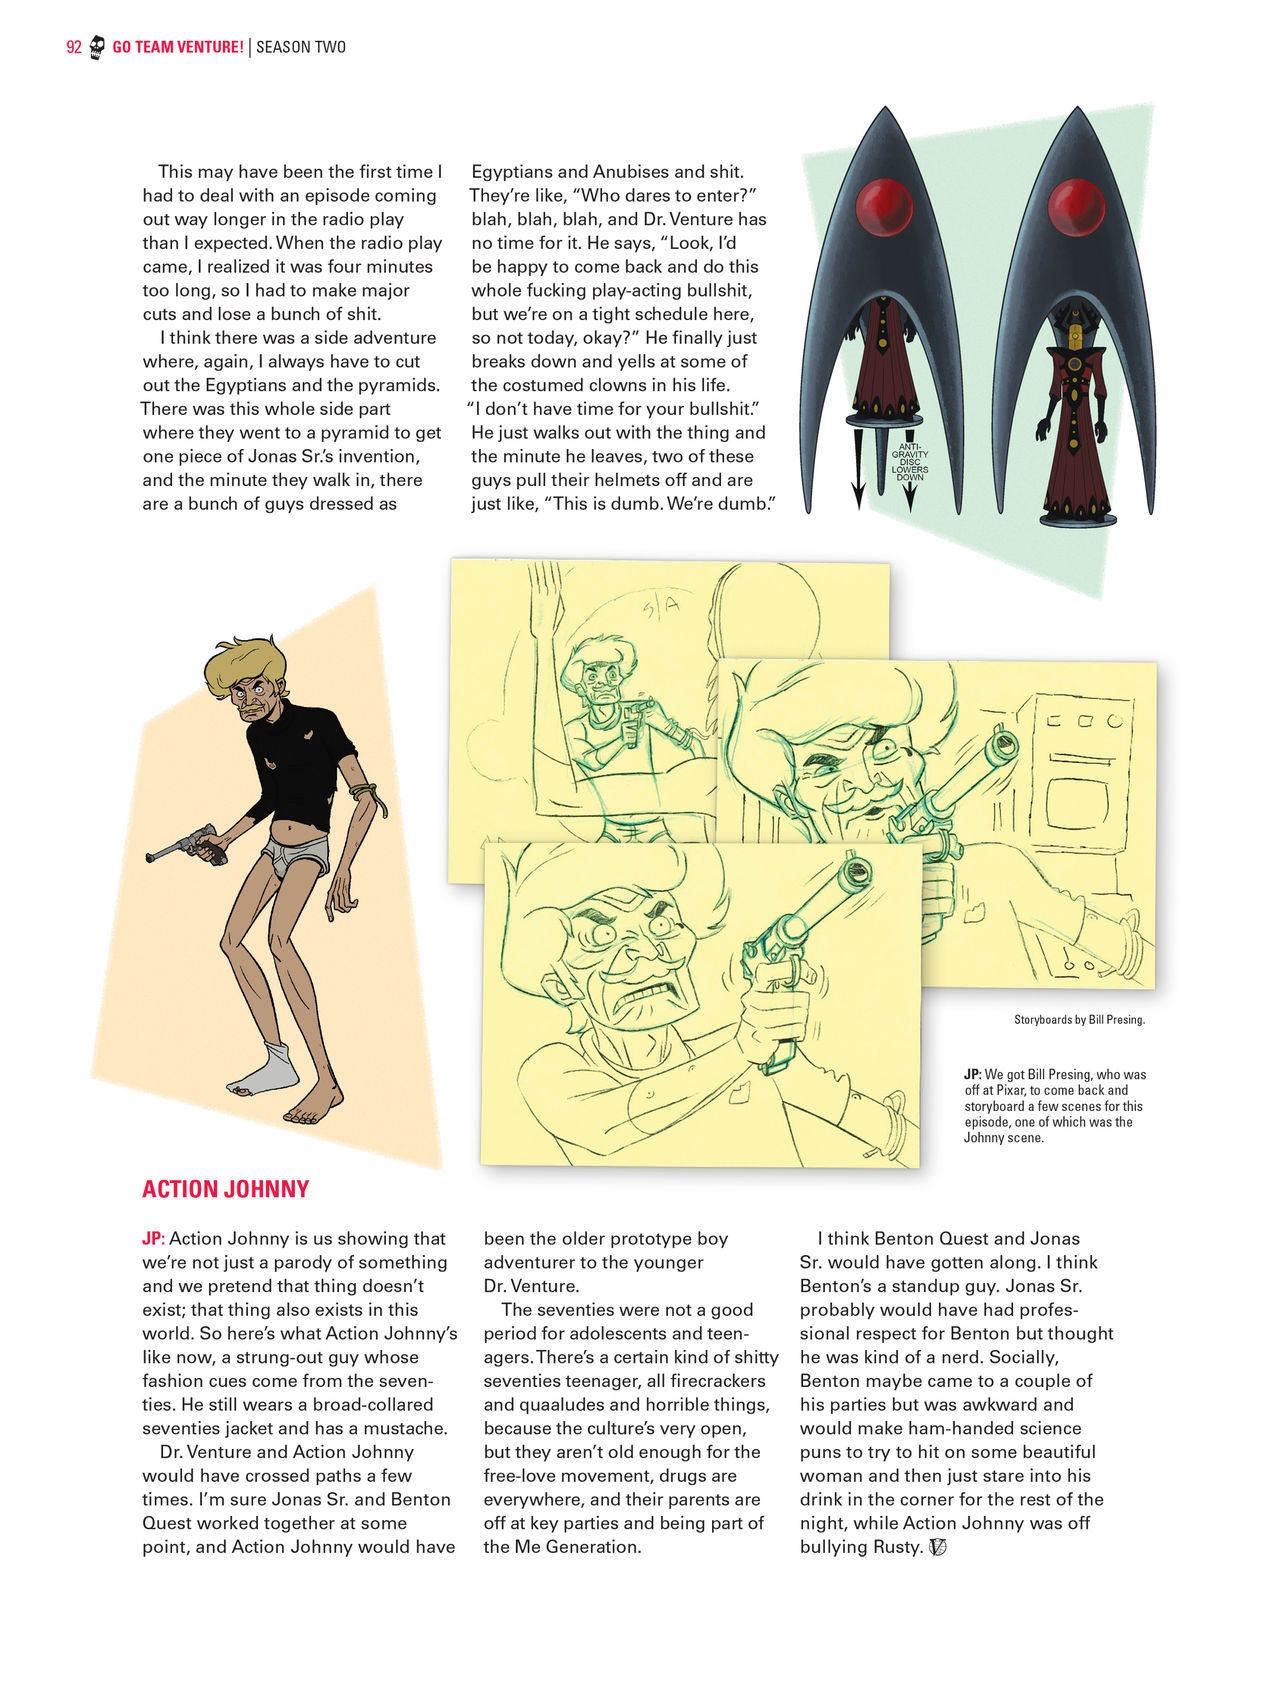 Go Team Venture! - The Art and Making of the Venture Bros 91